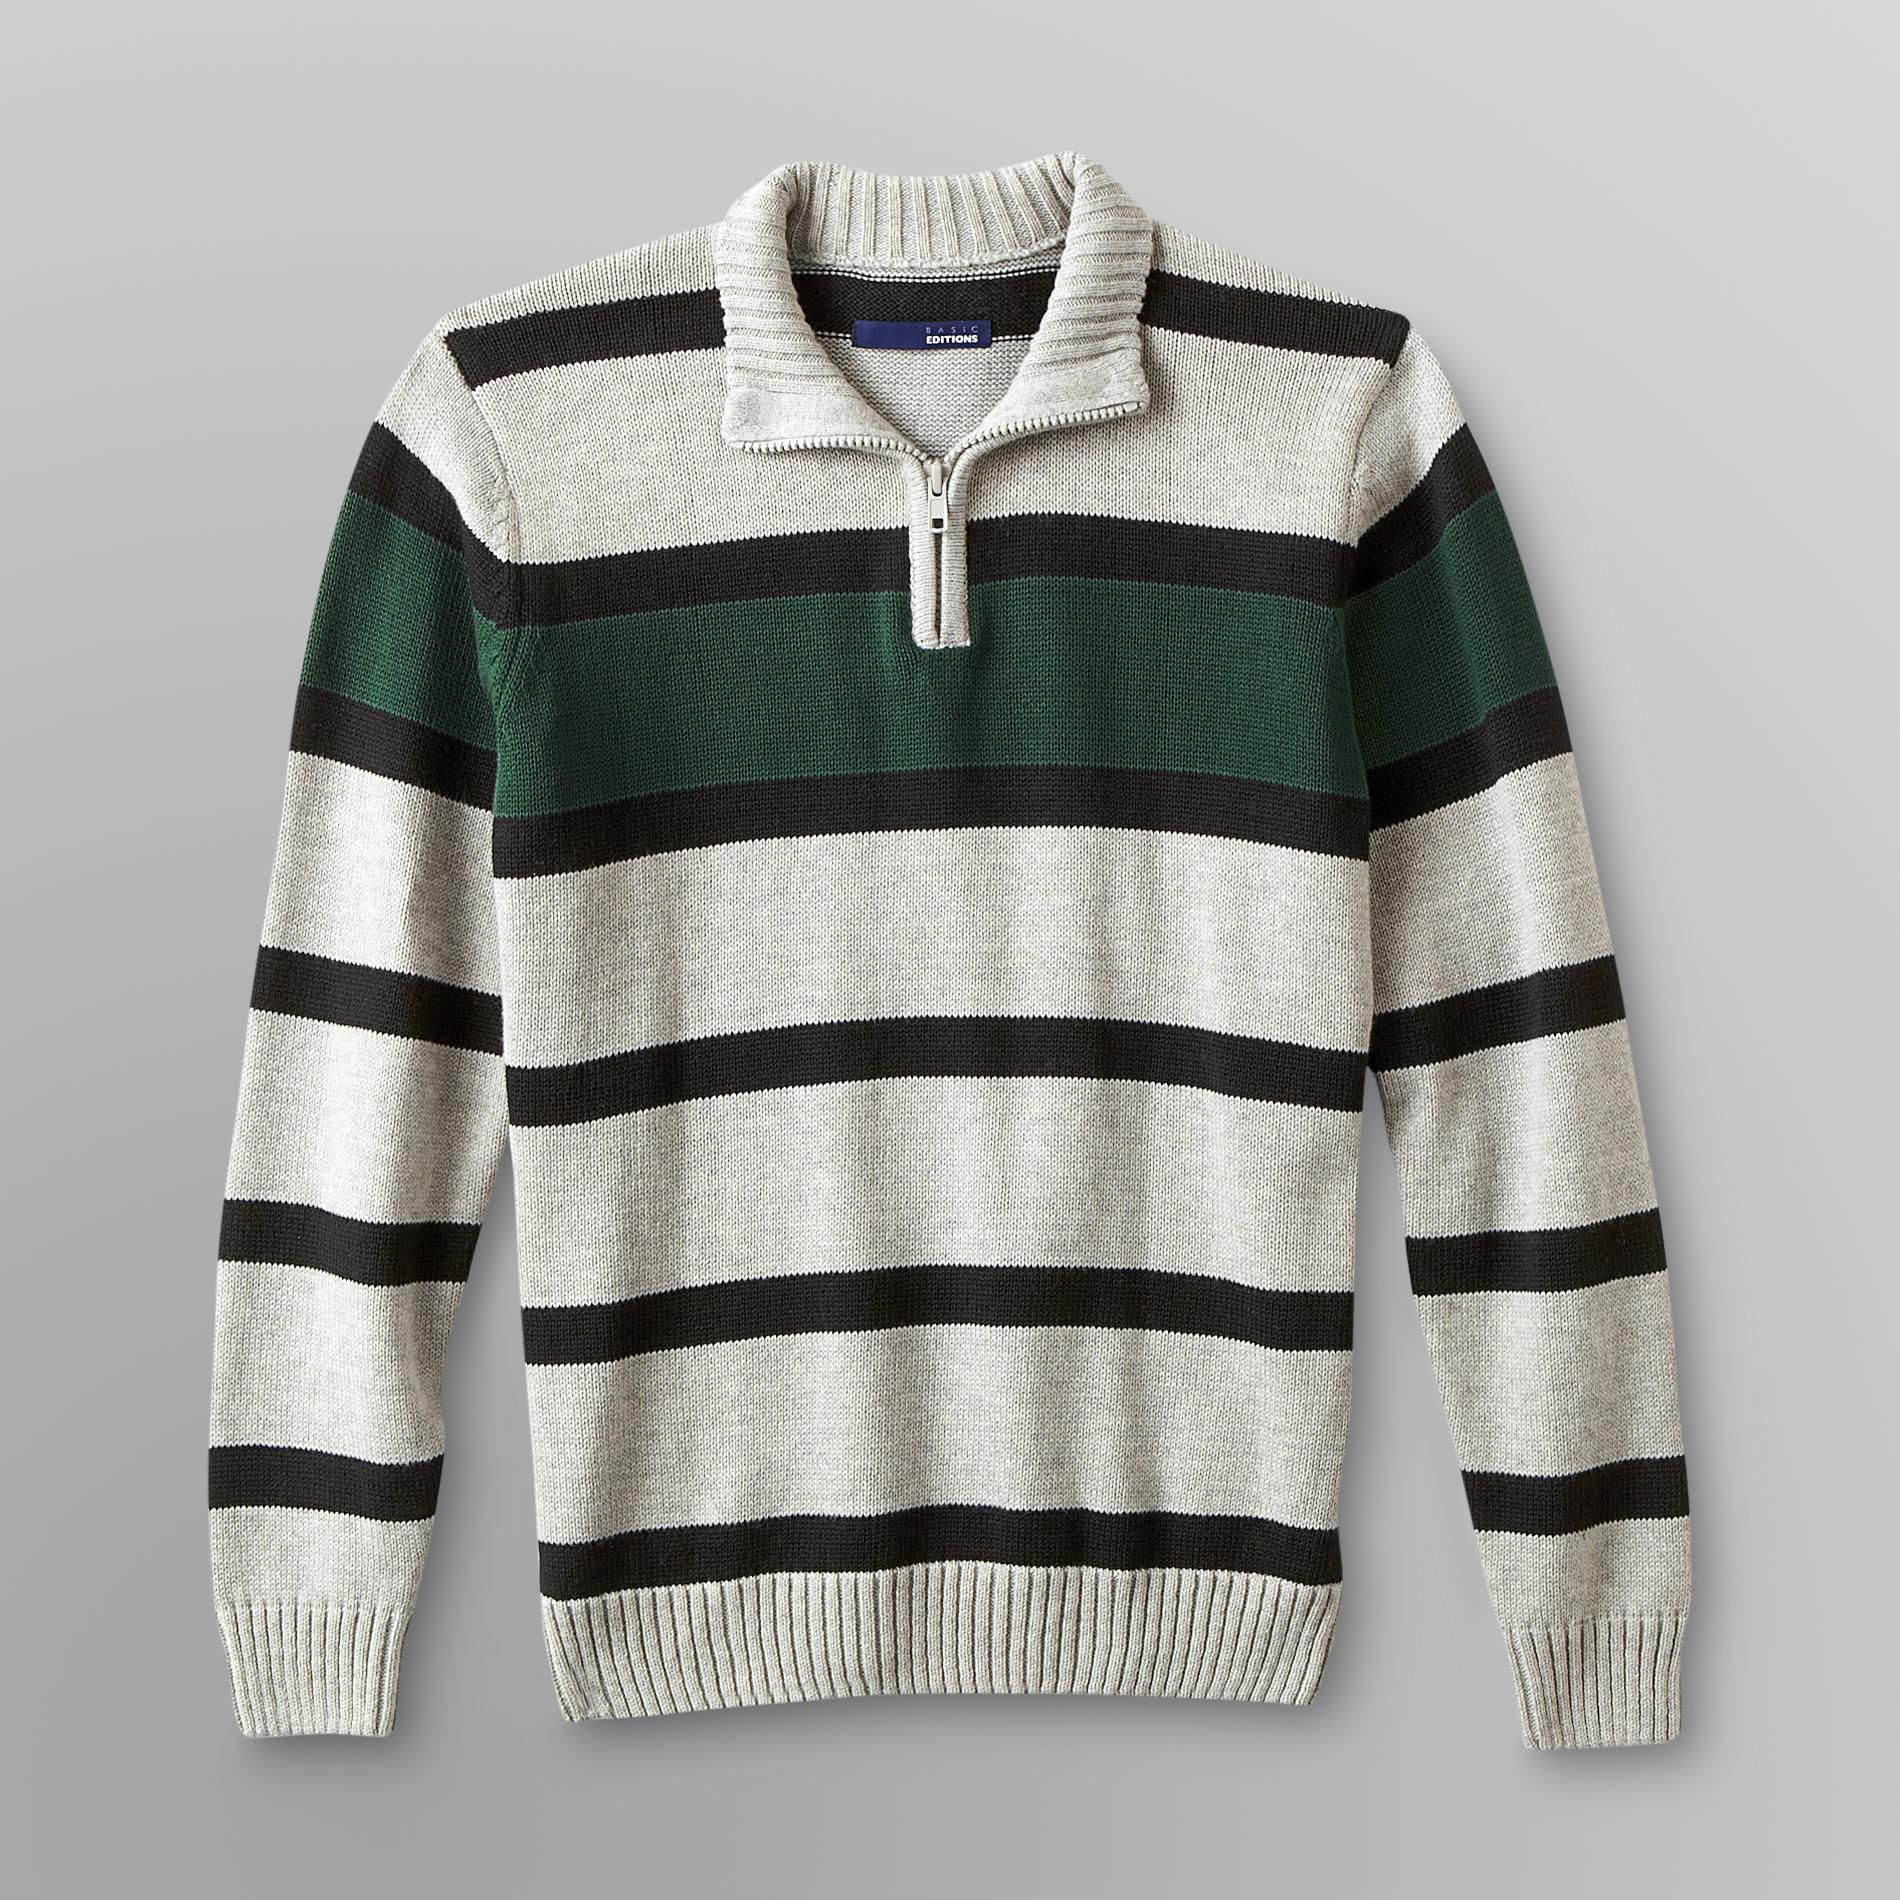 Basic Editions Boy's Zip Sweater - Striped